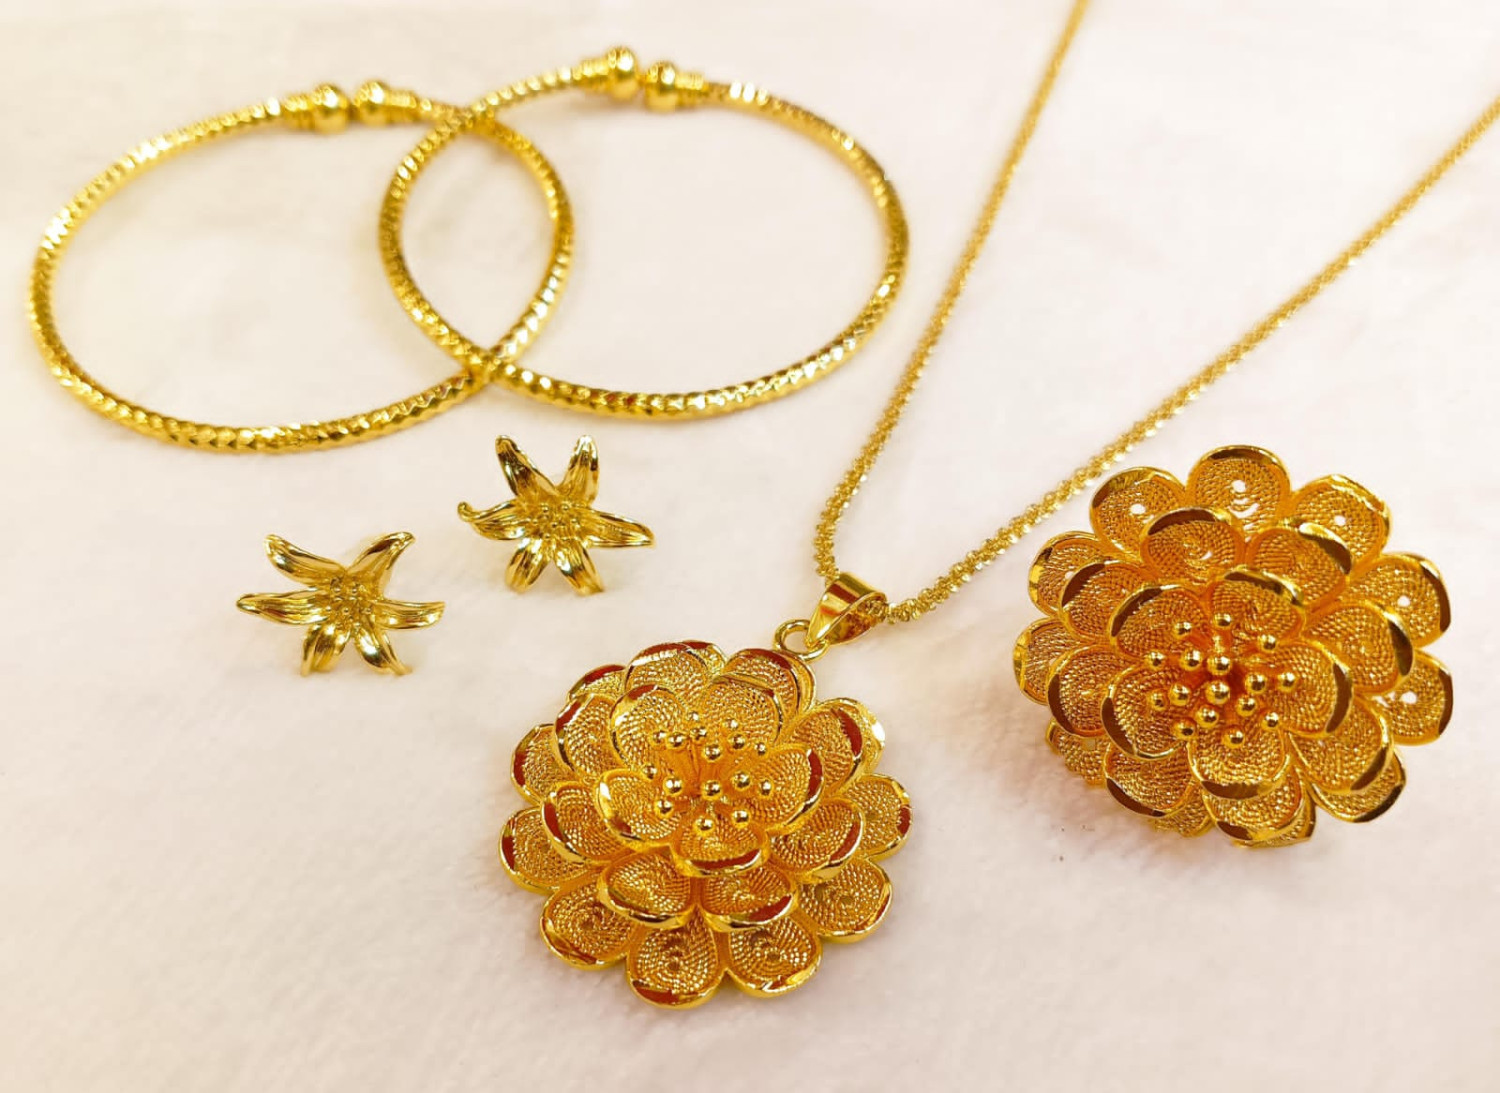 New dubai india gold color Luxurious Fashion african big flower jewelry Set women girls charms pendant necklace earrings gift